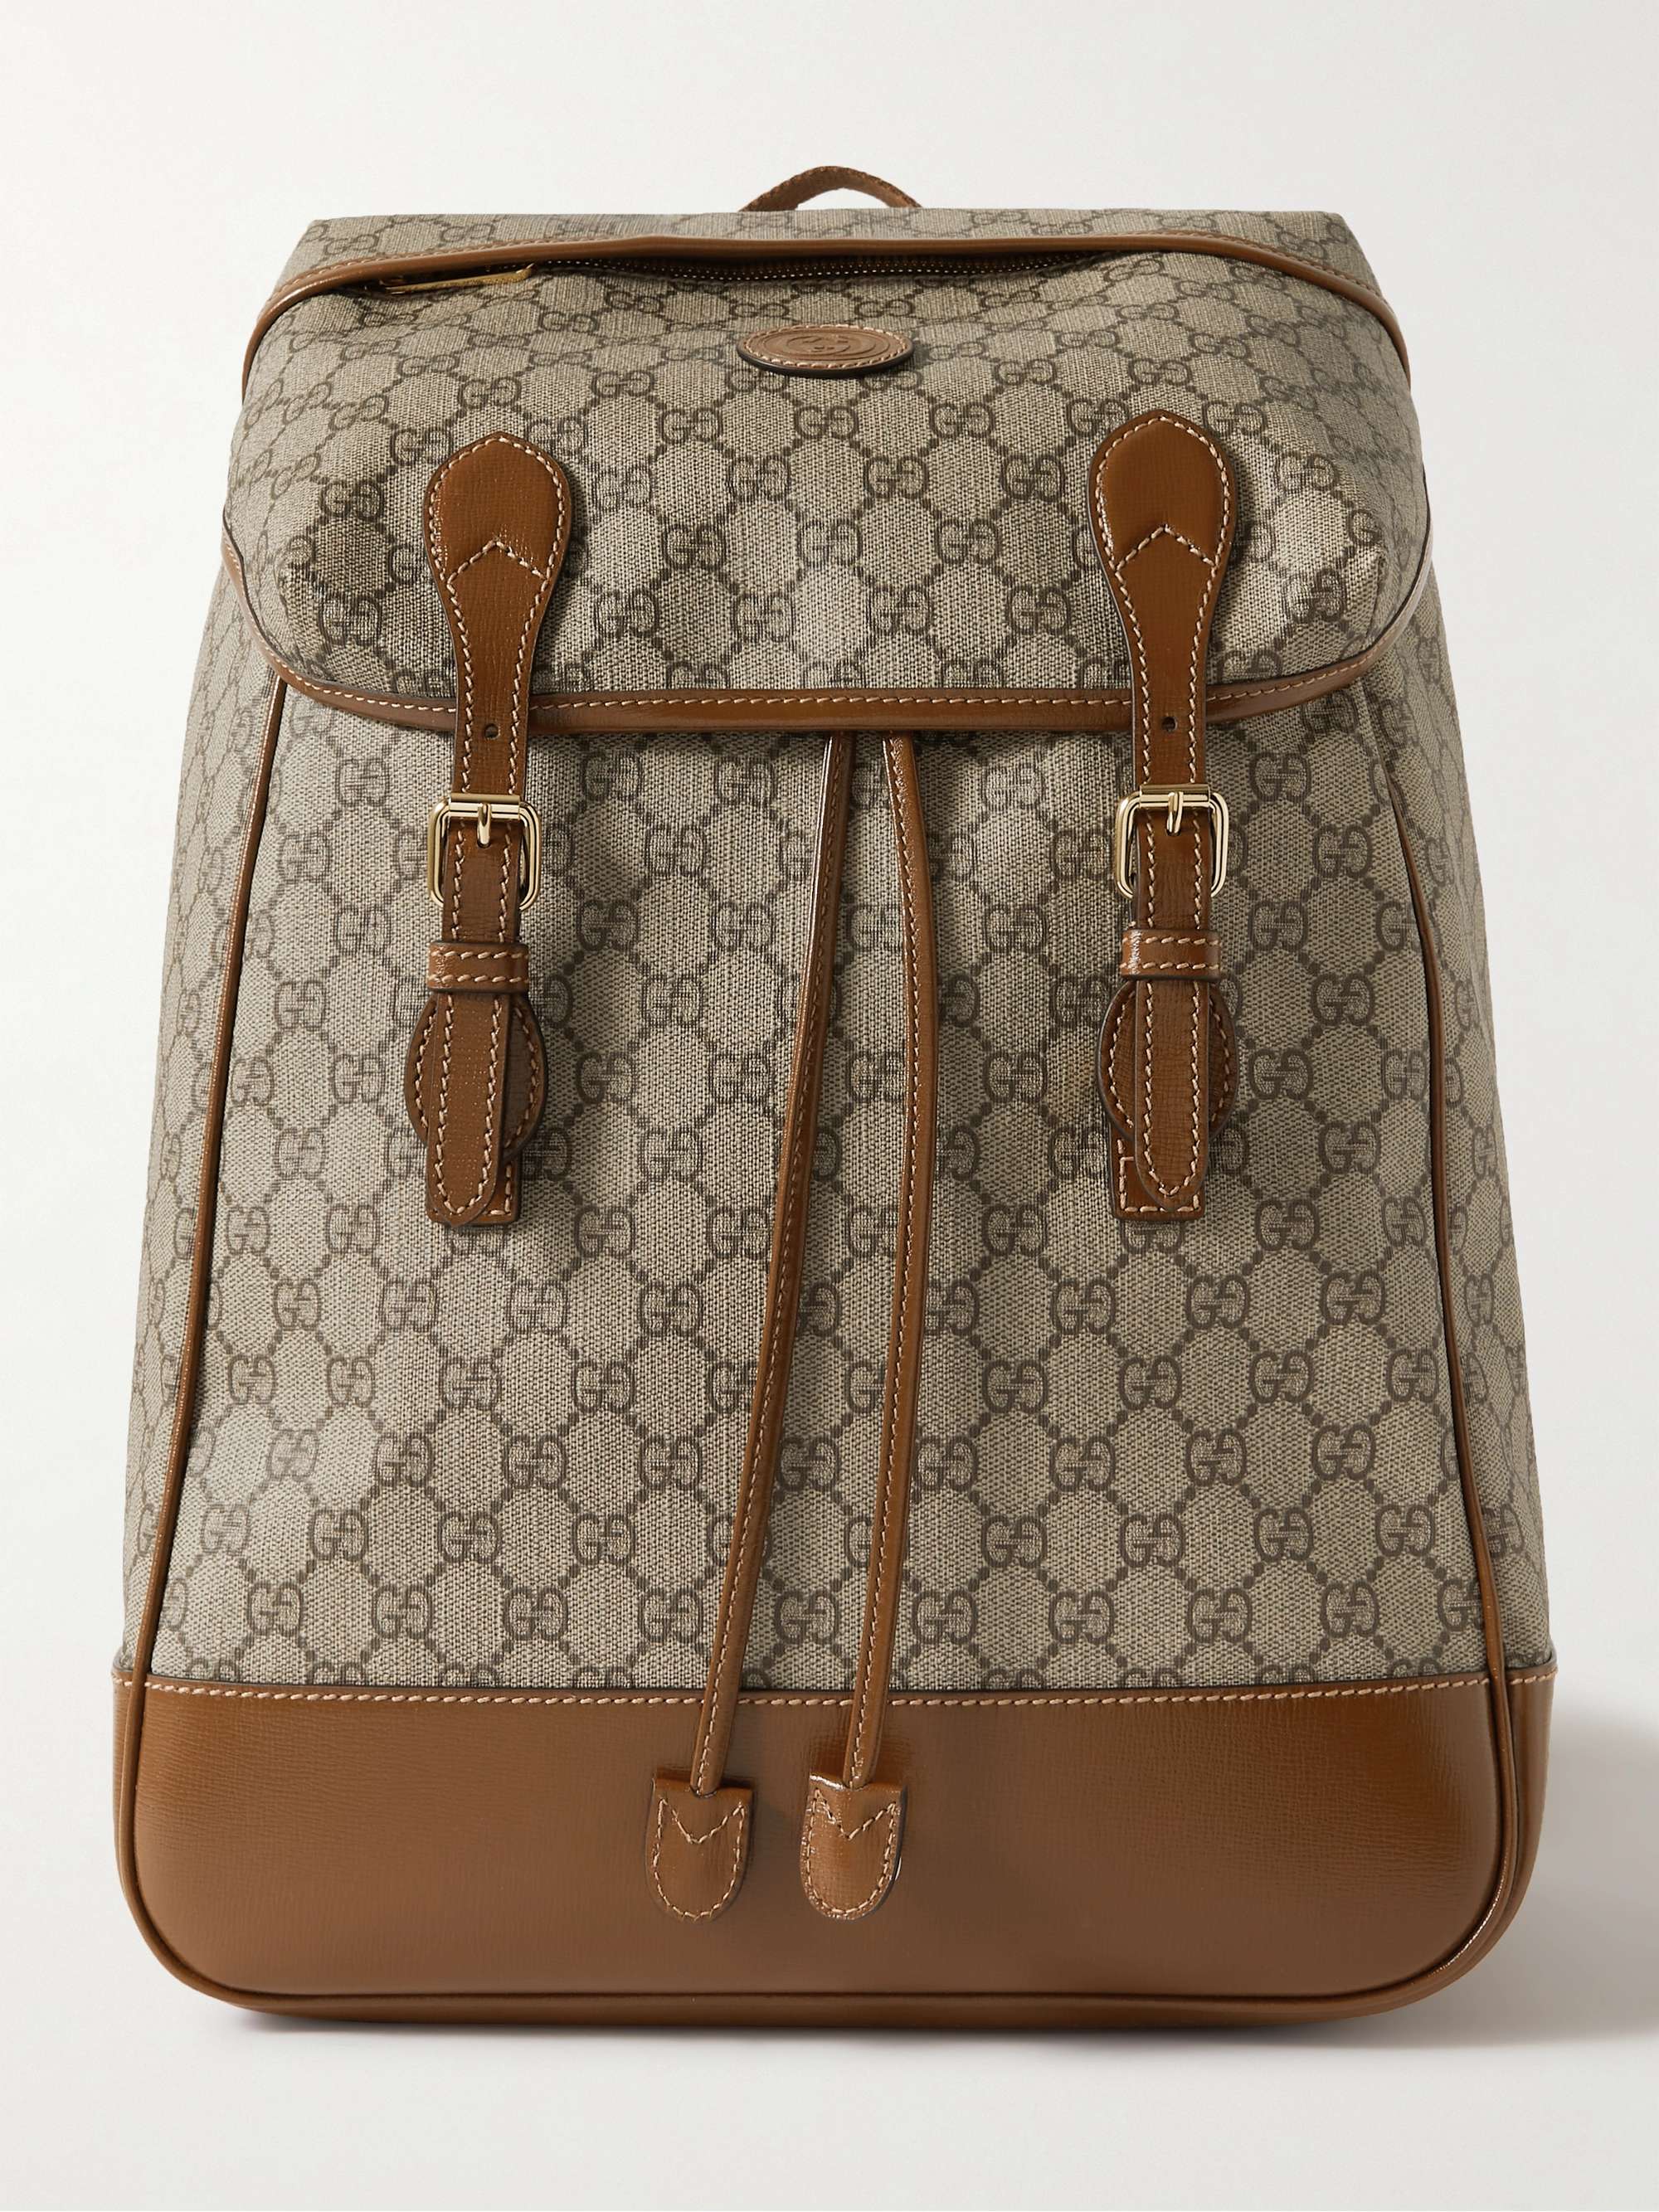 GUCCI Leather-Trimmed Monogrammed Coated-Canvas Backpack